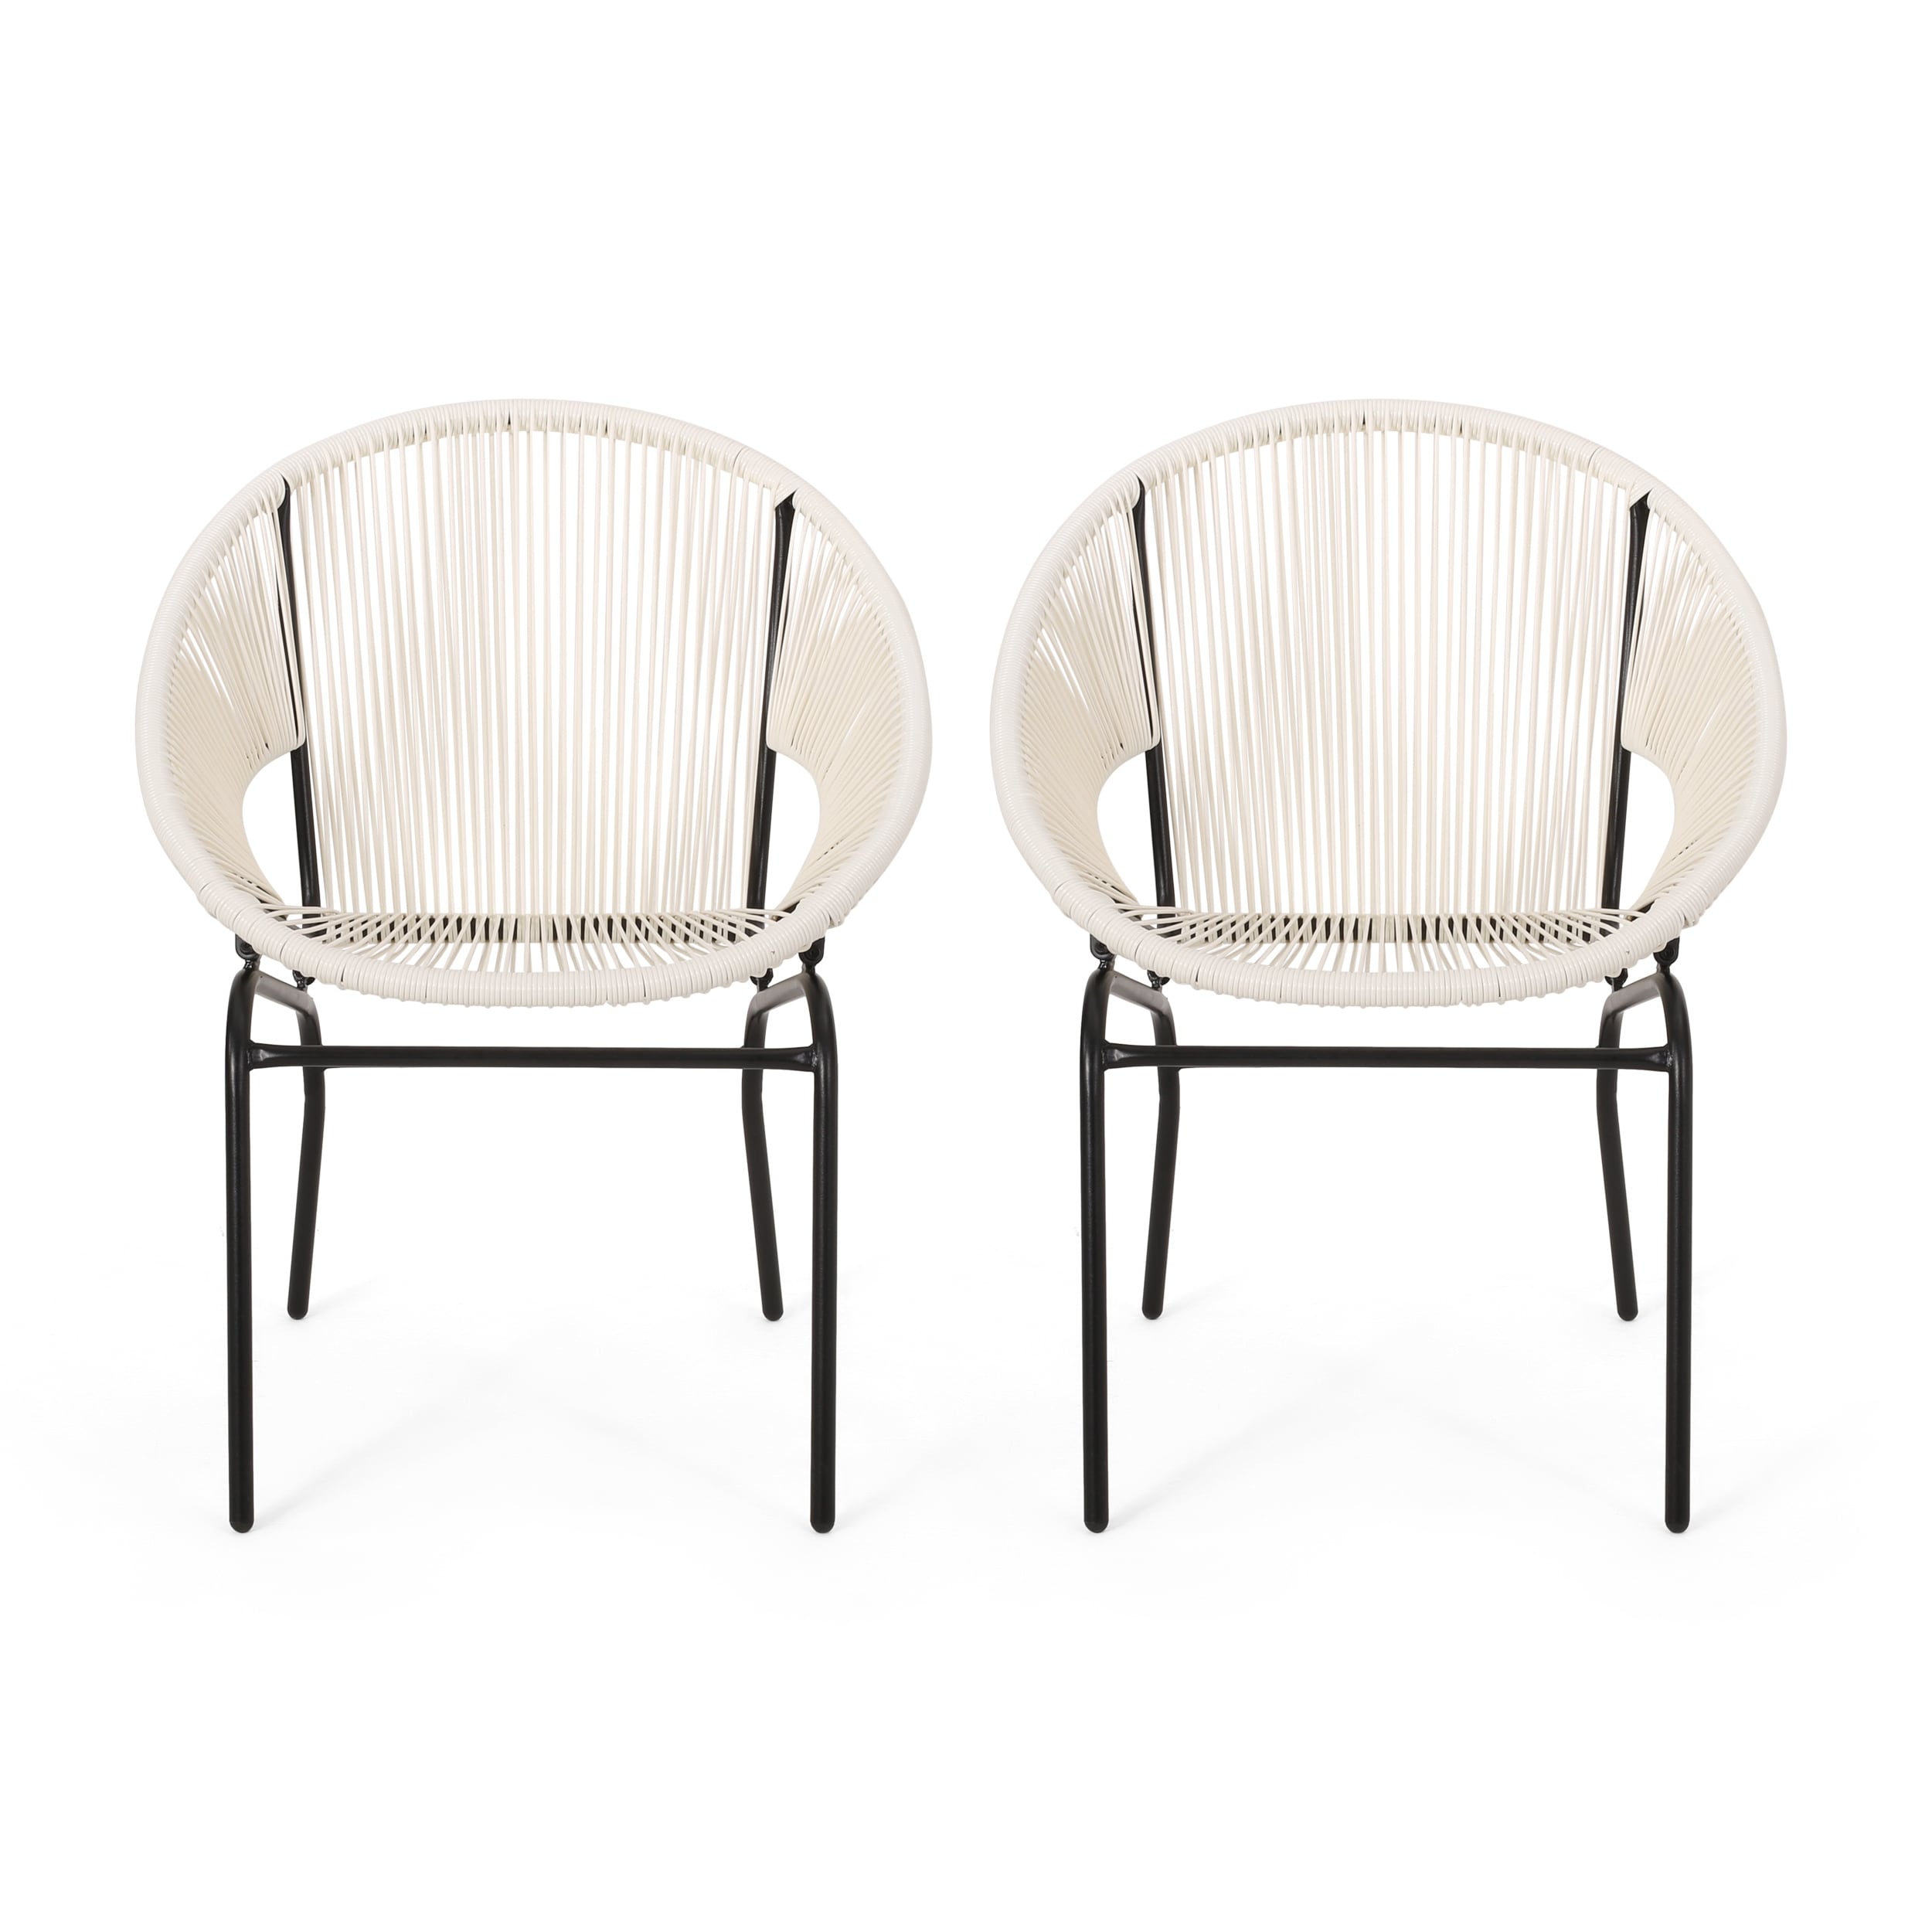 Nusa Outdoor Modern Wicker Club Chair (set Of 2) By Christopher Knight Home